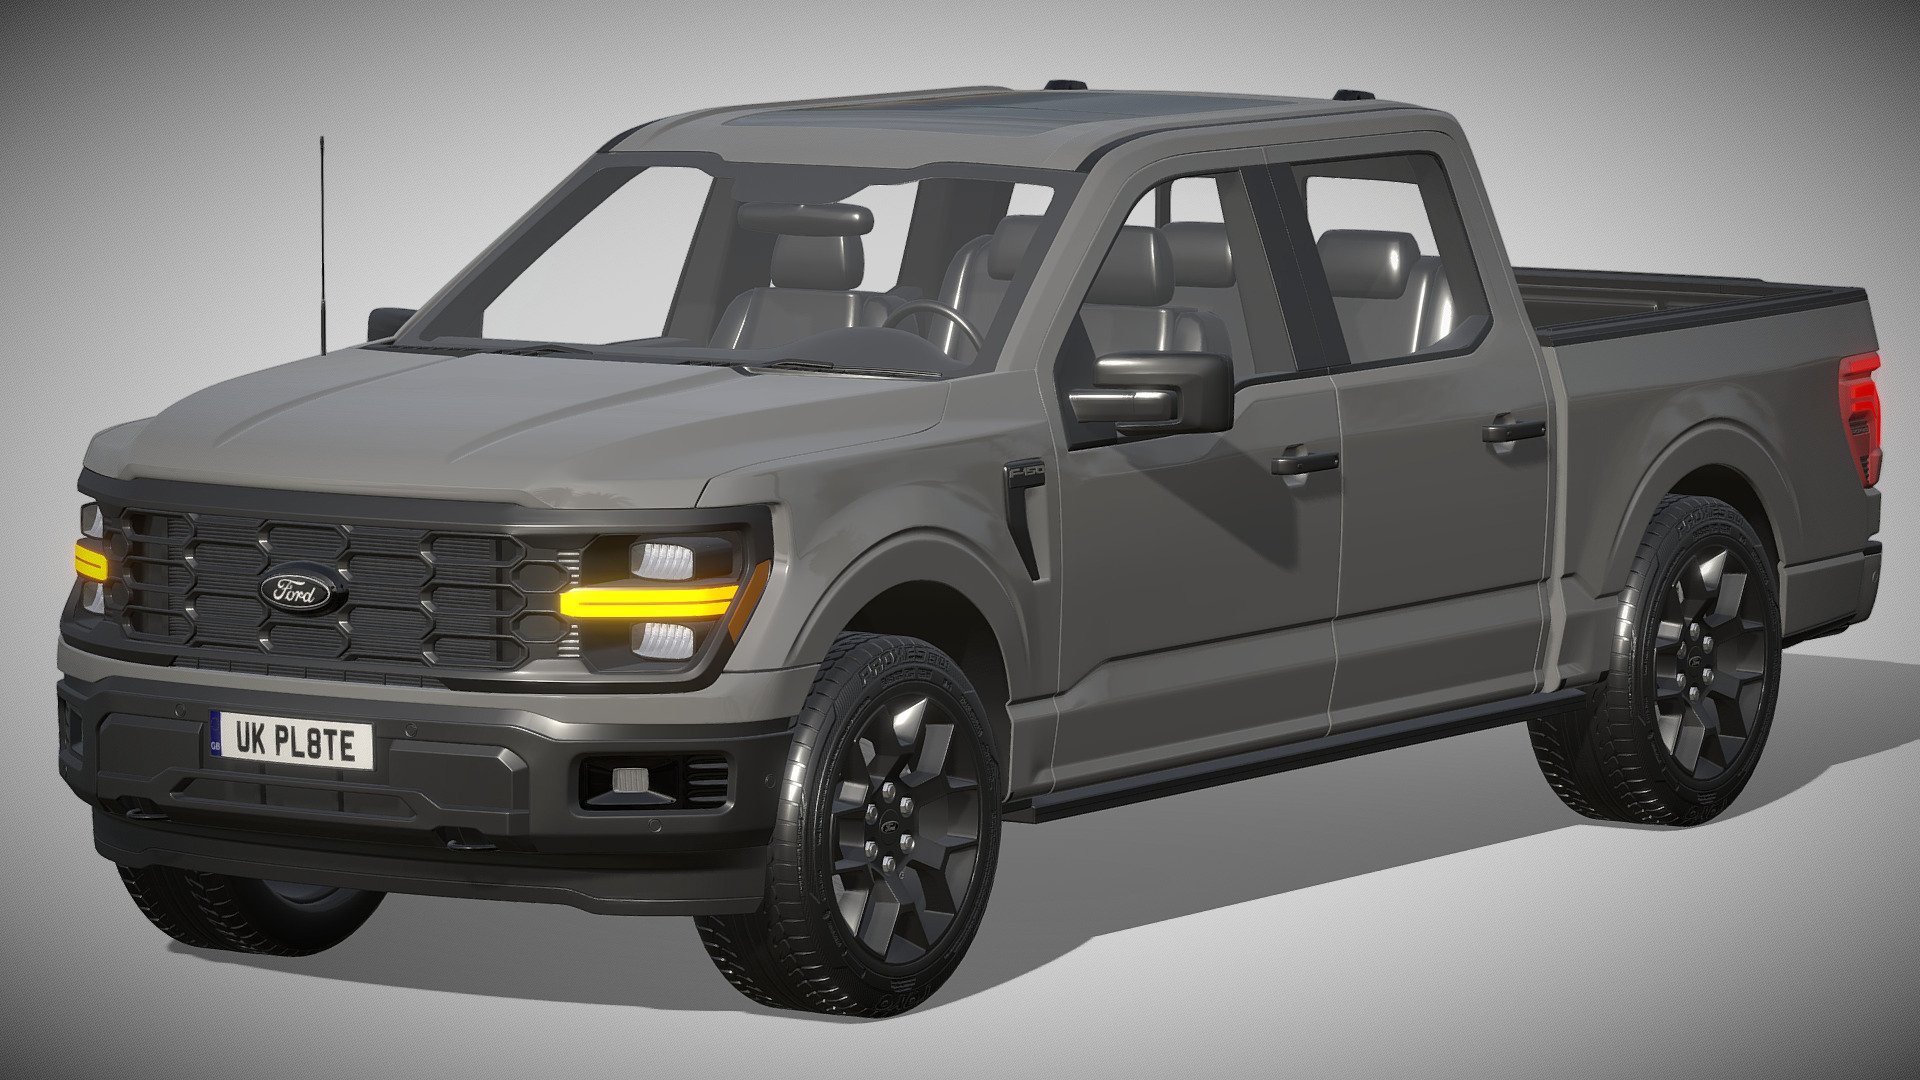 Ford F-150 STX 2024

https://www.ford.com/trucks/f150/2024/

Clean geometry Light weight model, yet completely detailed for HI-Res renders. Use for movies, Advertisements or games

Corona render and materials

All textures include in *.rar files

Lighting setup is not included in the file! - Ford F-150 STX 2024 - Buy Royalty Free 3D model by zifir3d 3d model